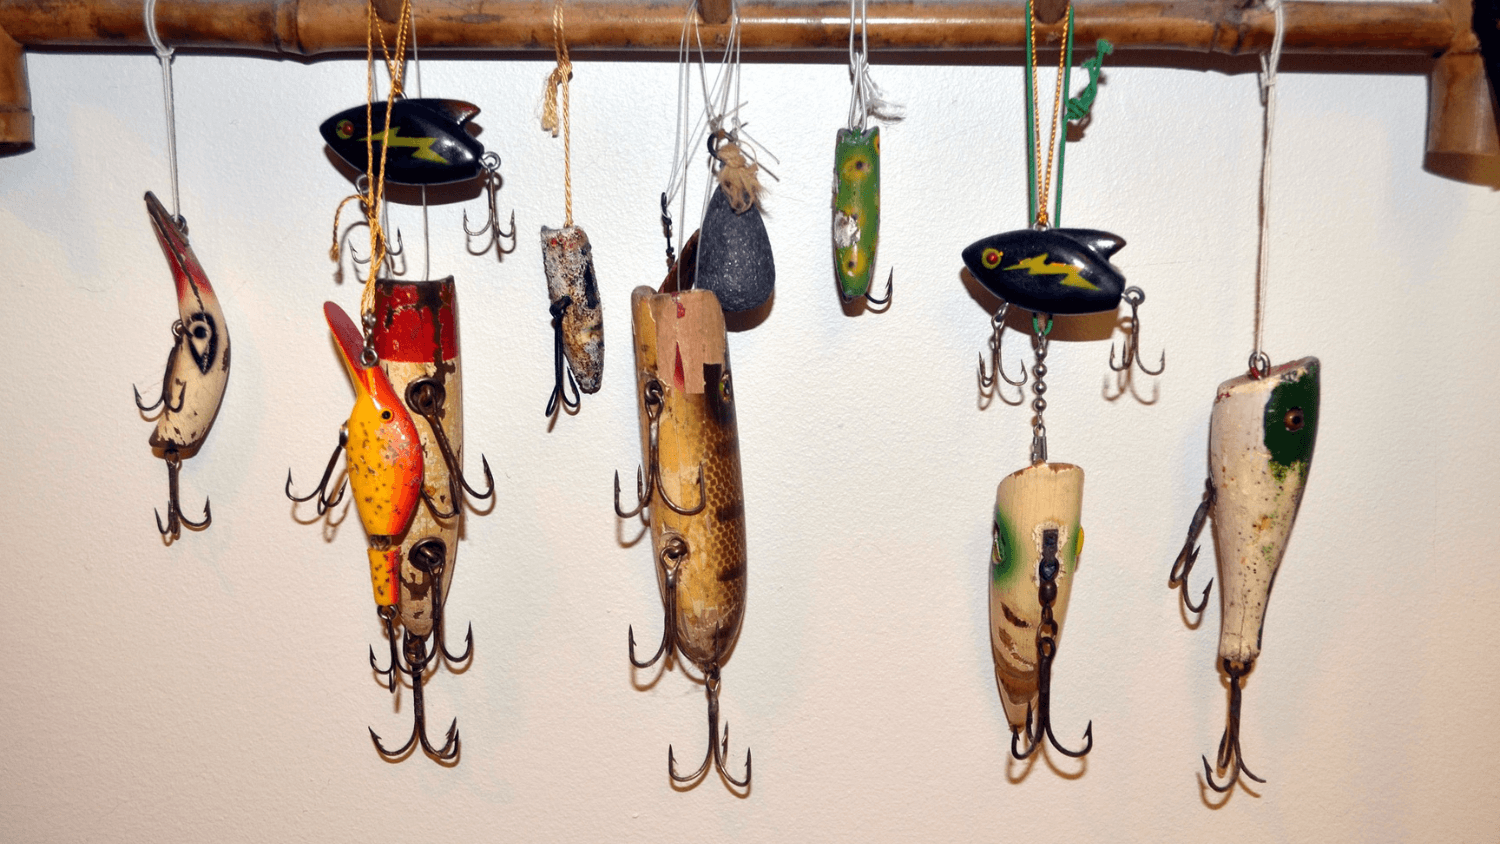 Fishing lures strung up to a wooden board